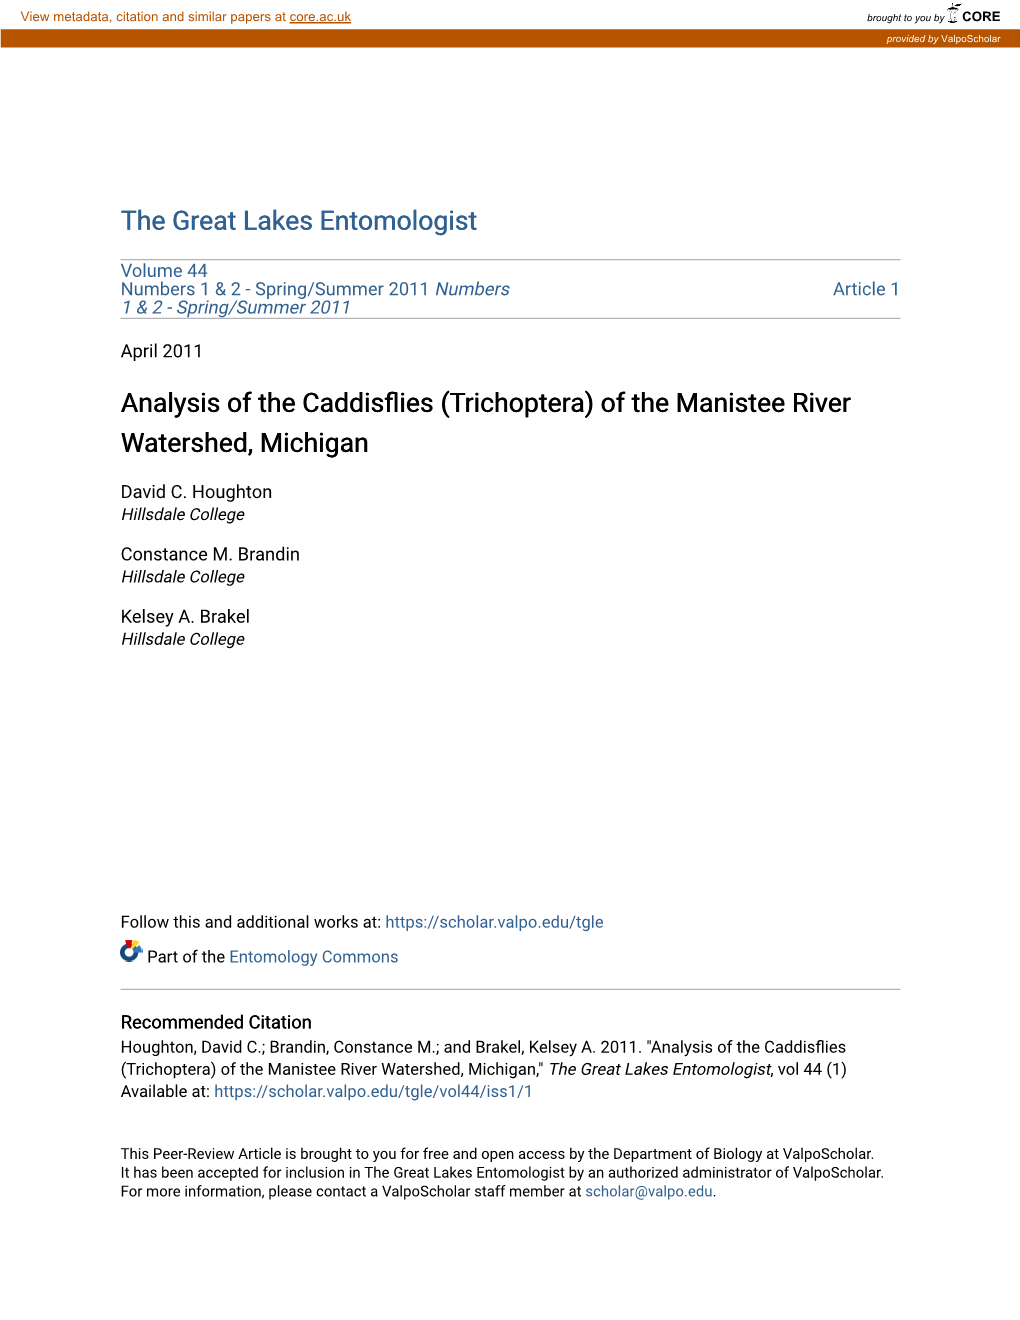 Analysis of the Caddisflies (Trichoptera) of the Manistee River Watershed, Michigan